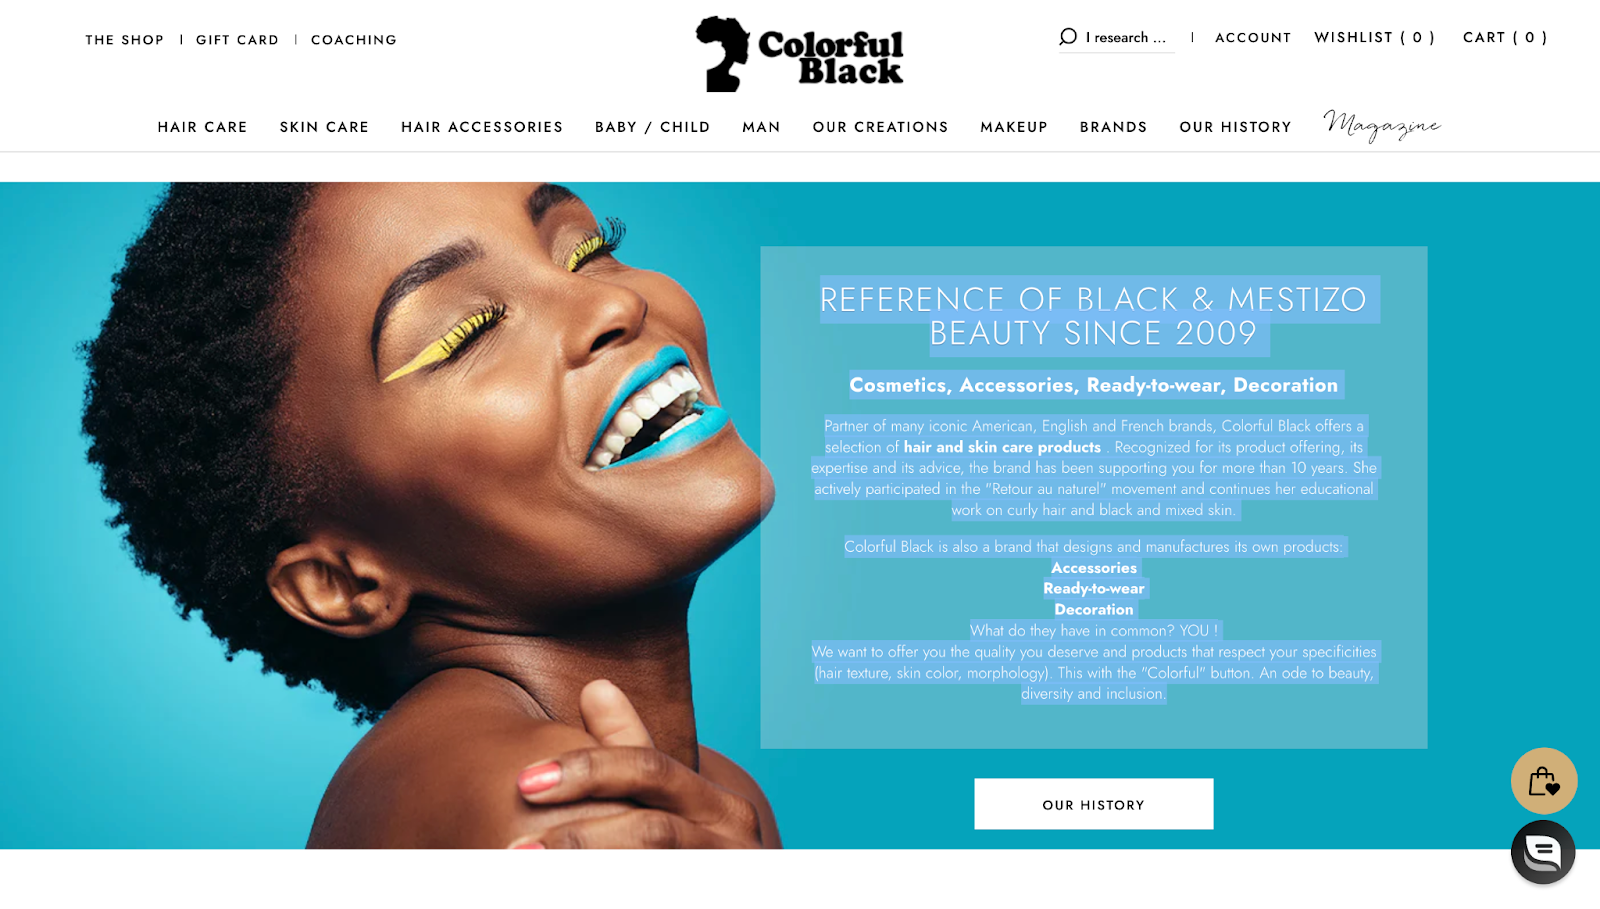 Mental Wellness Brands for World Mental Health Day–A screenshot of Colorful Black’s homepage showing a black woman smiling with yellow eyeliner and blue lipstick on a blue background. The text reads, “REFERENCE OF BLACK & MESTIZO BEAUTY SINCE 2009 Cosmetics, Accessories, Ready-to-wear, Decoration. Partner of many iconic American, English and French brands, Colorful Black offers a selection of hair and skin care products . Recognized for its product offering, its expertise and its advice, the brand has been supporting you for more than 10 years. She actively participated in the 